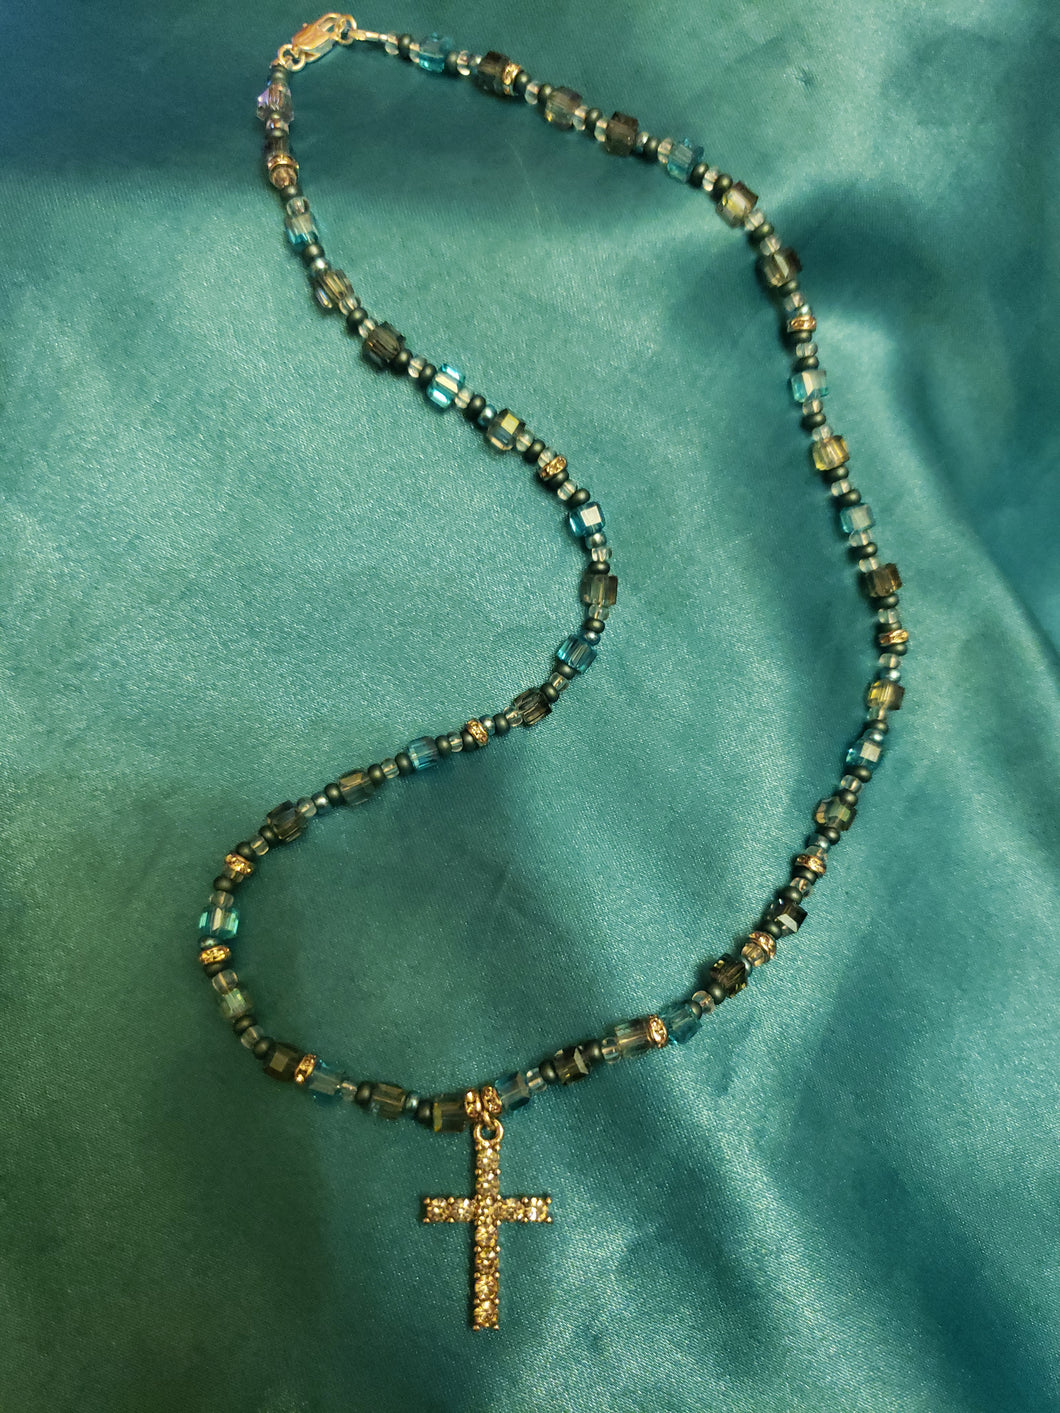 Blue glass bead necklace with crystal cross pendant.